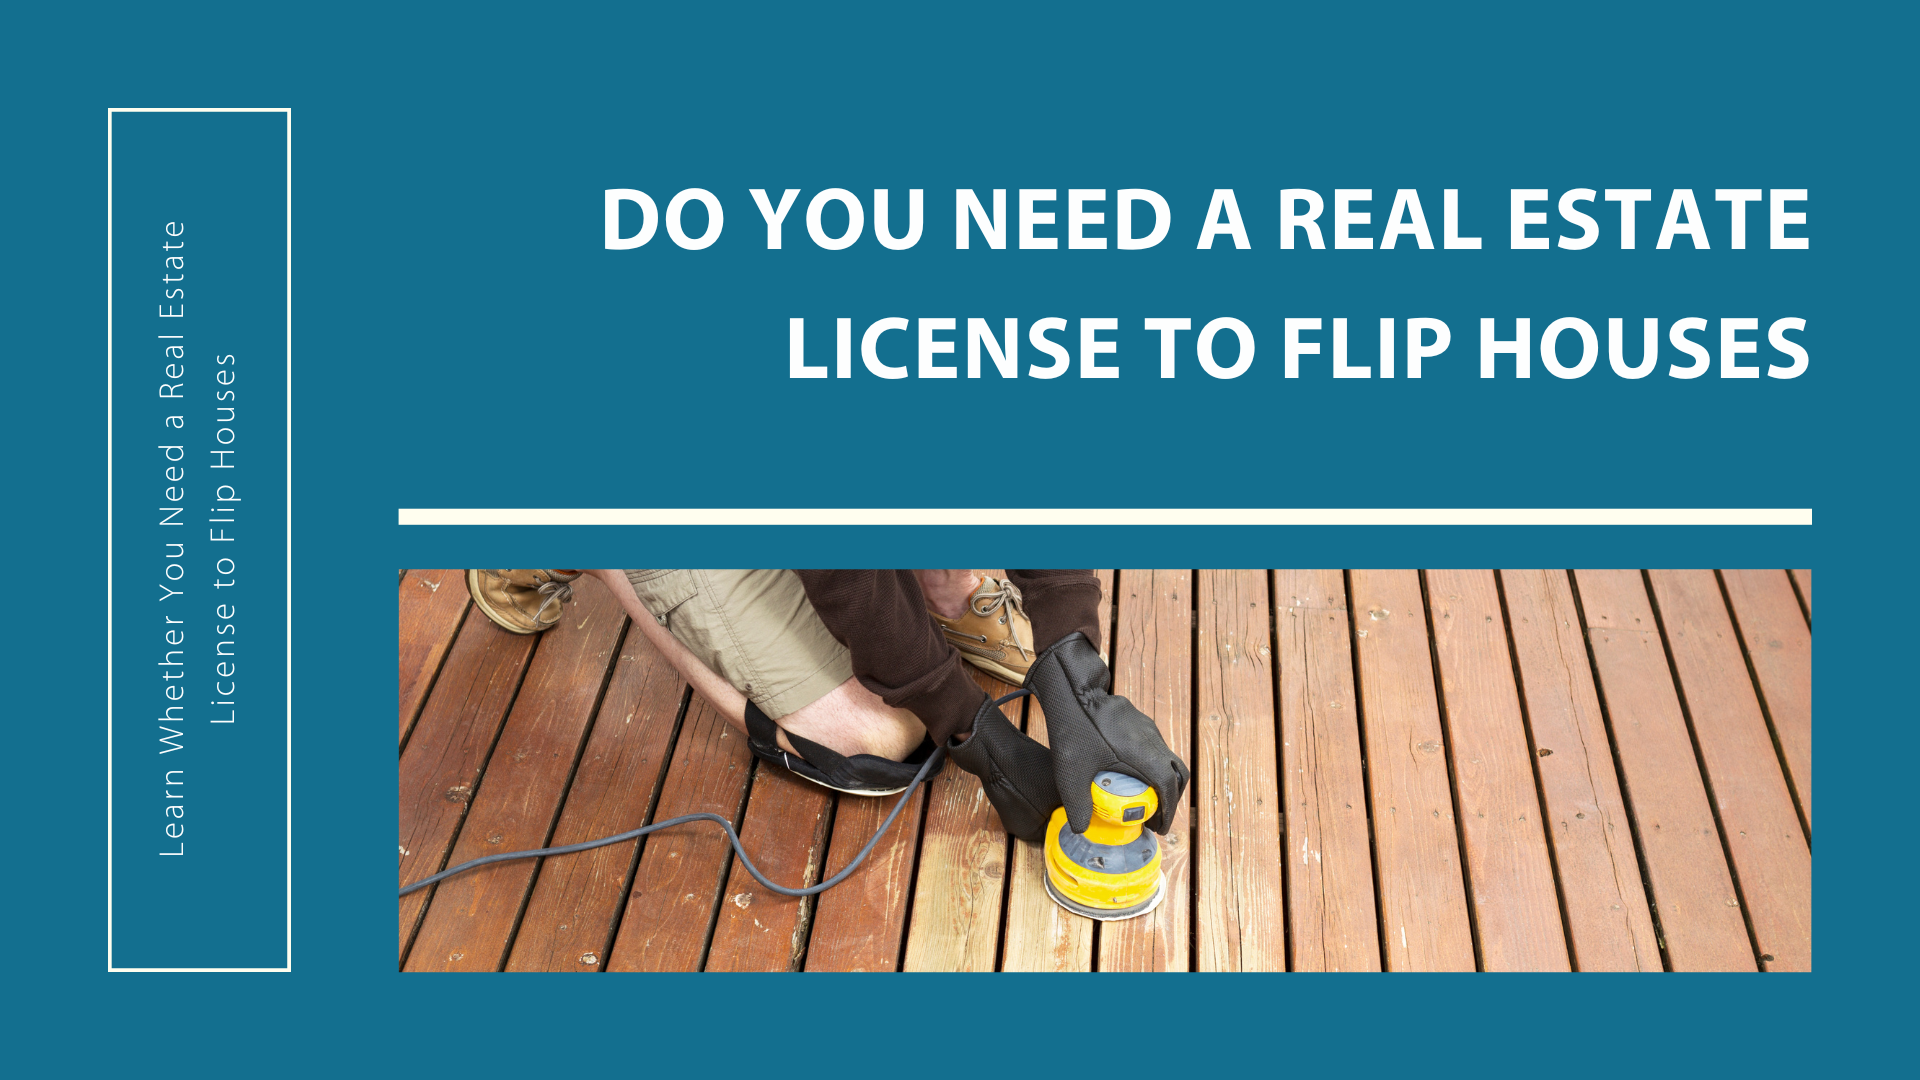 Do you need to a real estate license to flip houses